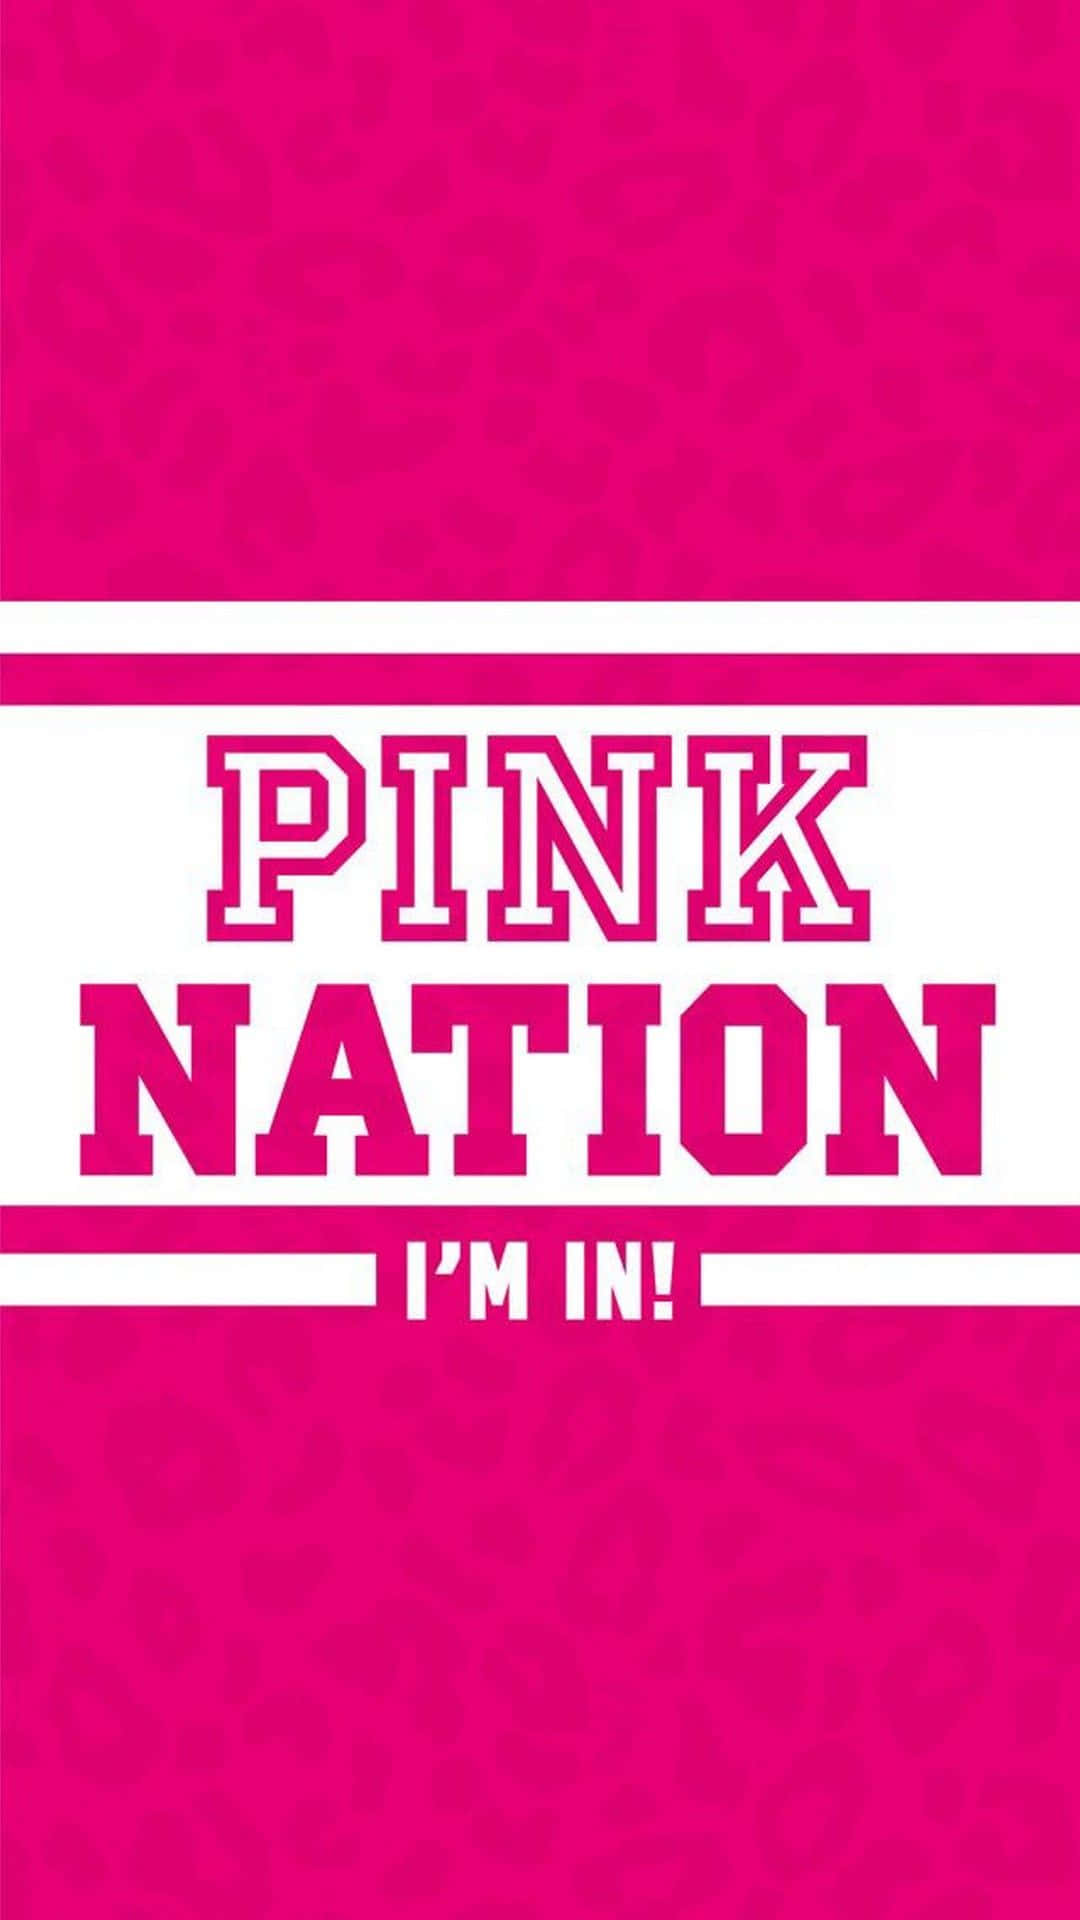 Join Pink Nation and join the lifestyle revolution Wallpaper